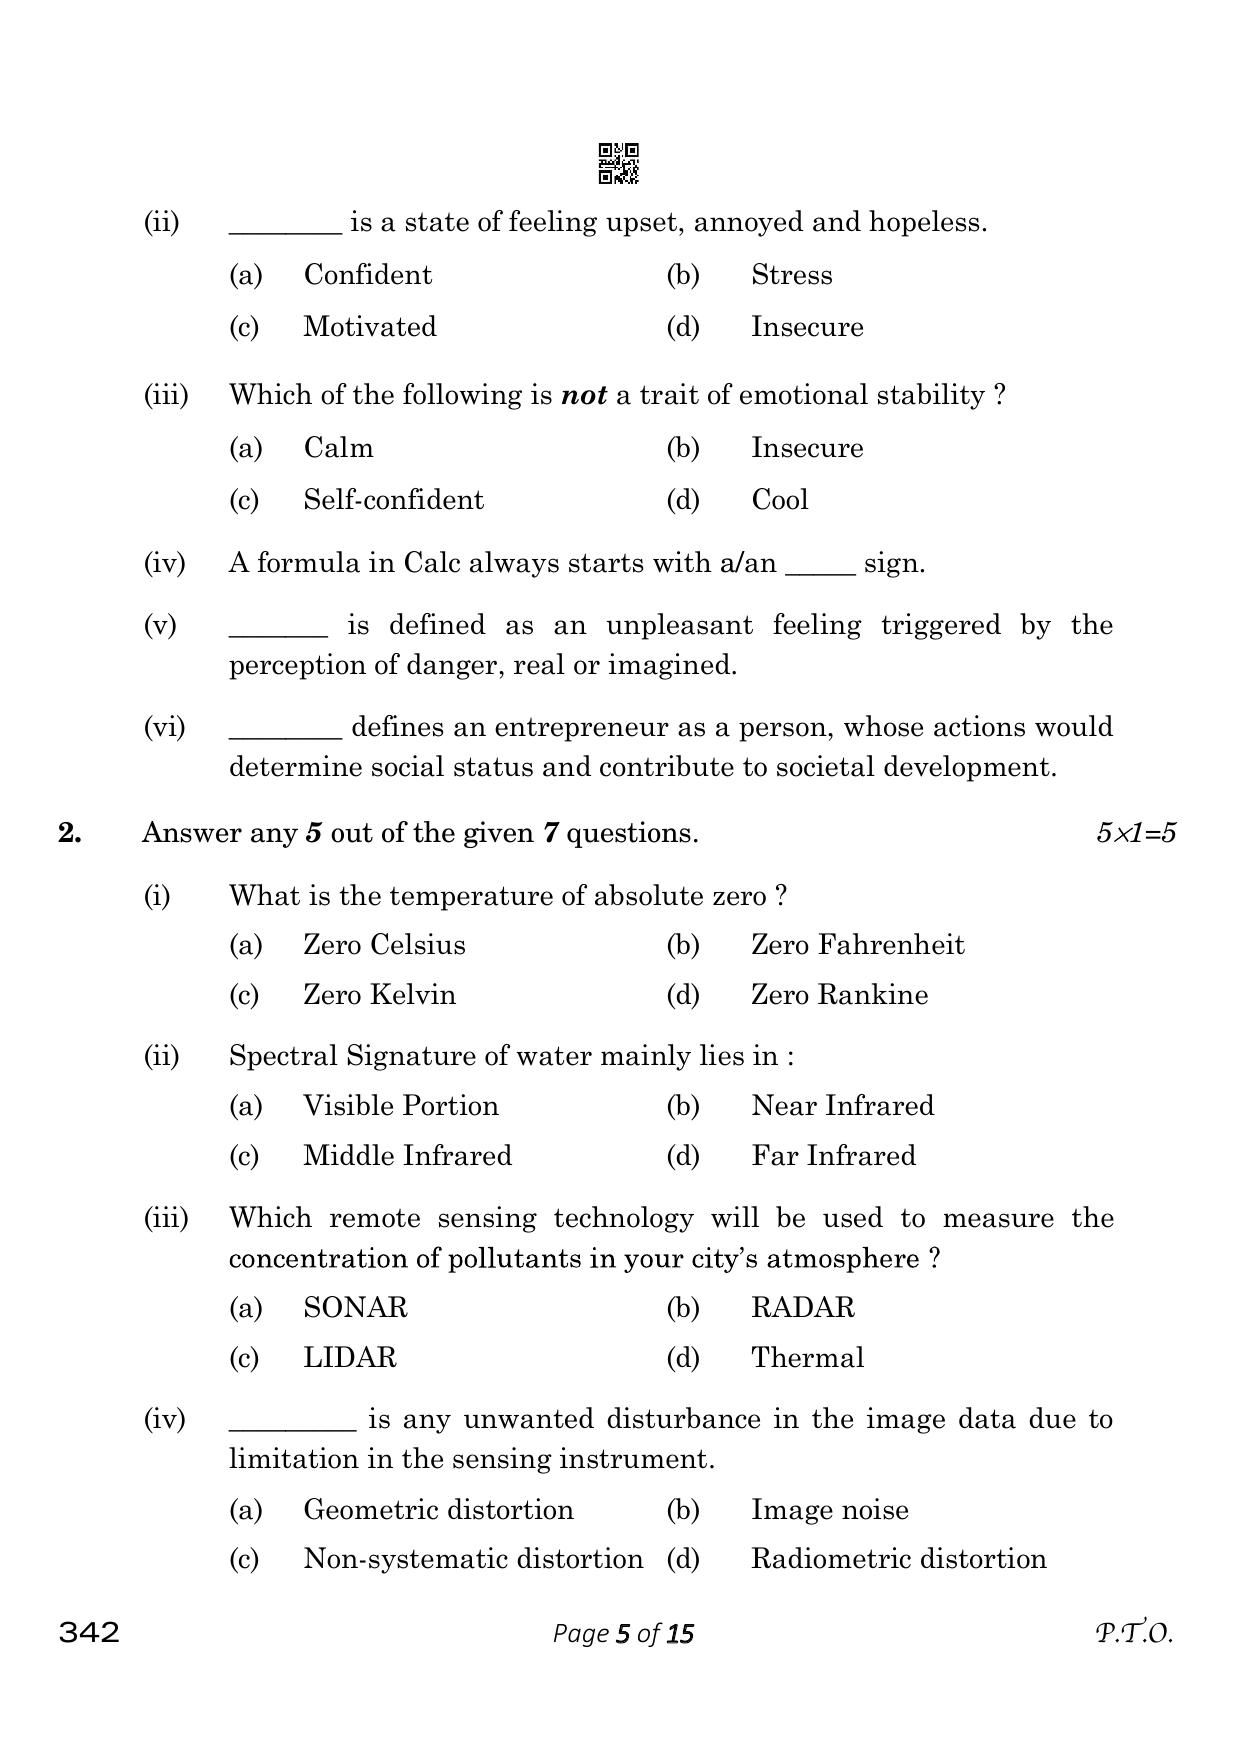 CBSE Class 12 342_Geospatial Technology 2023 Question Paper - Page 5